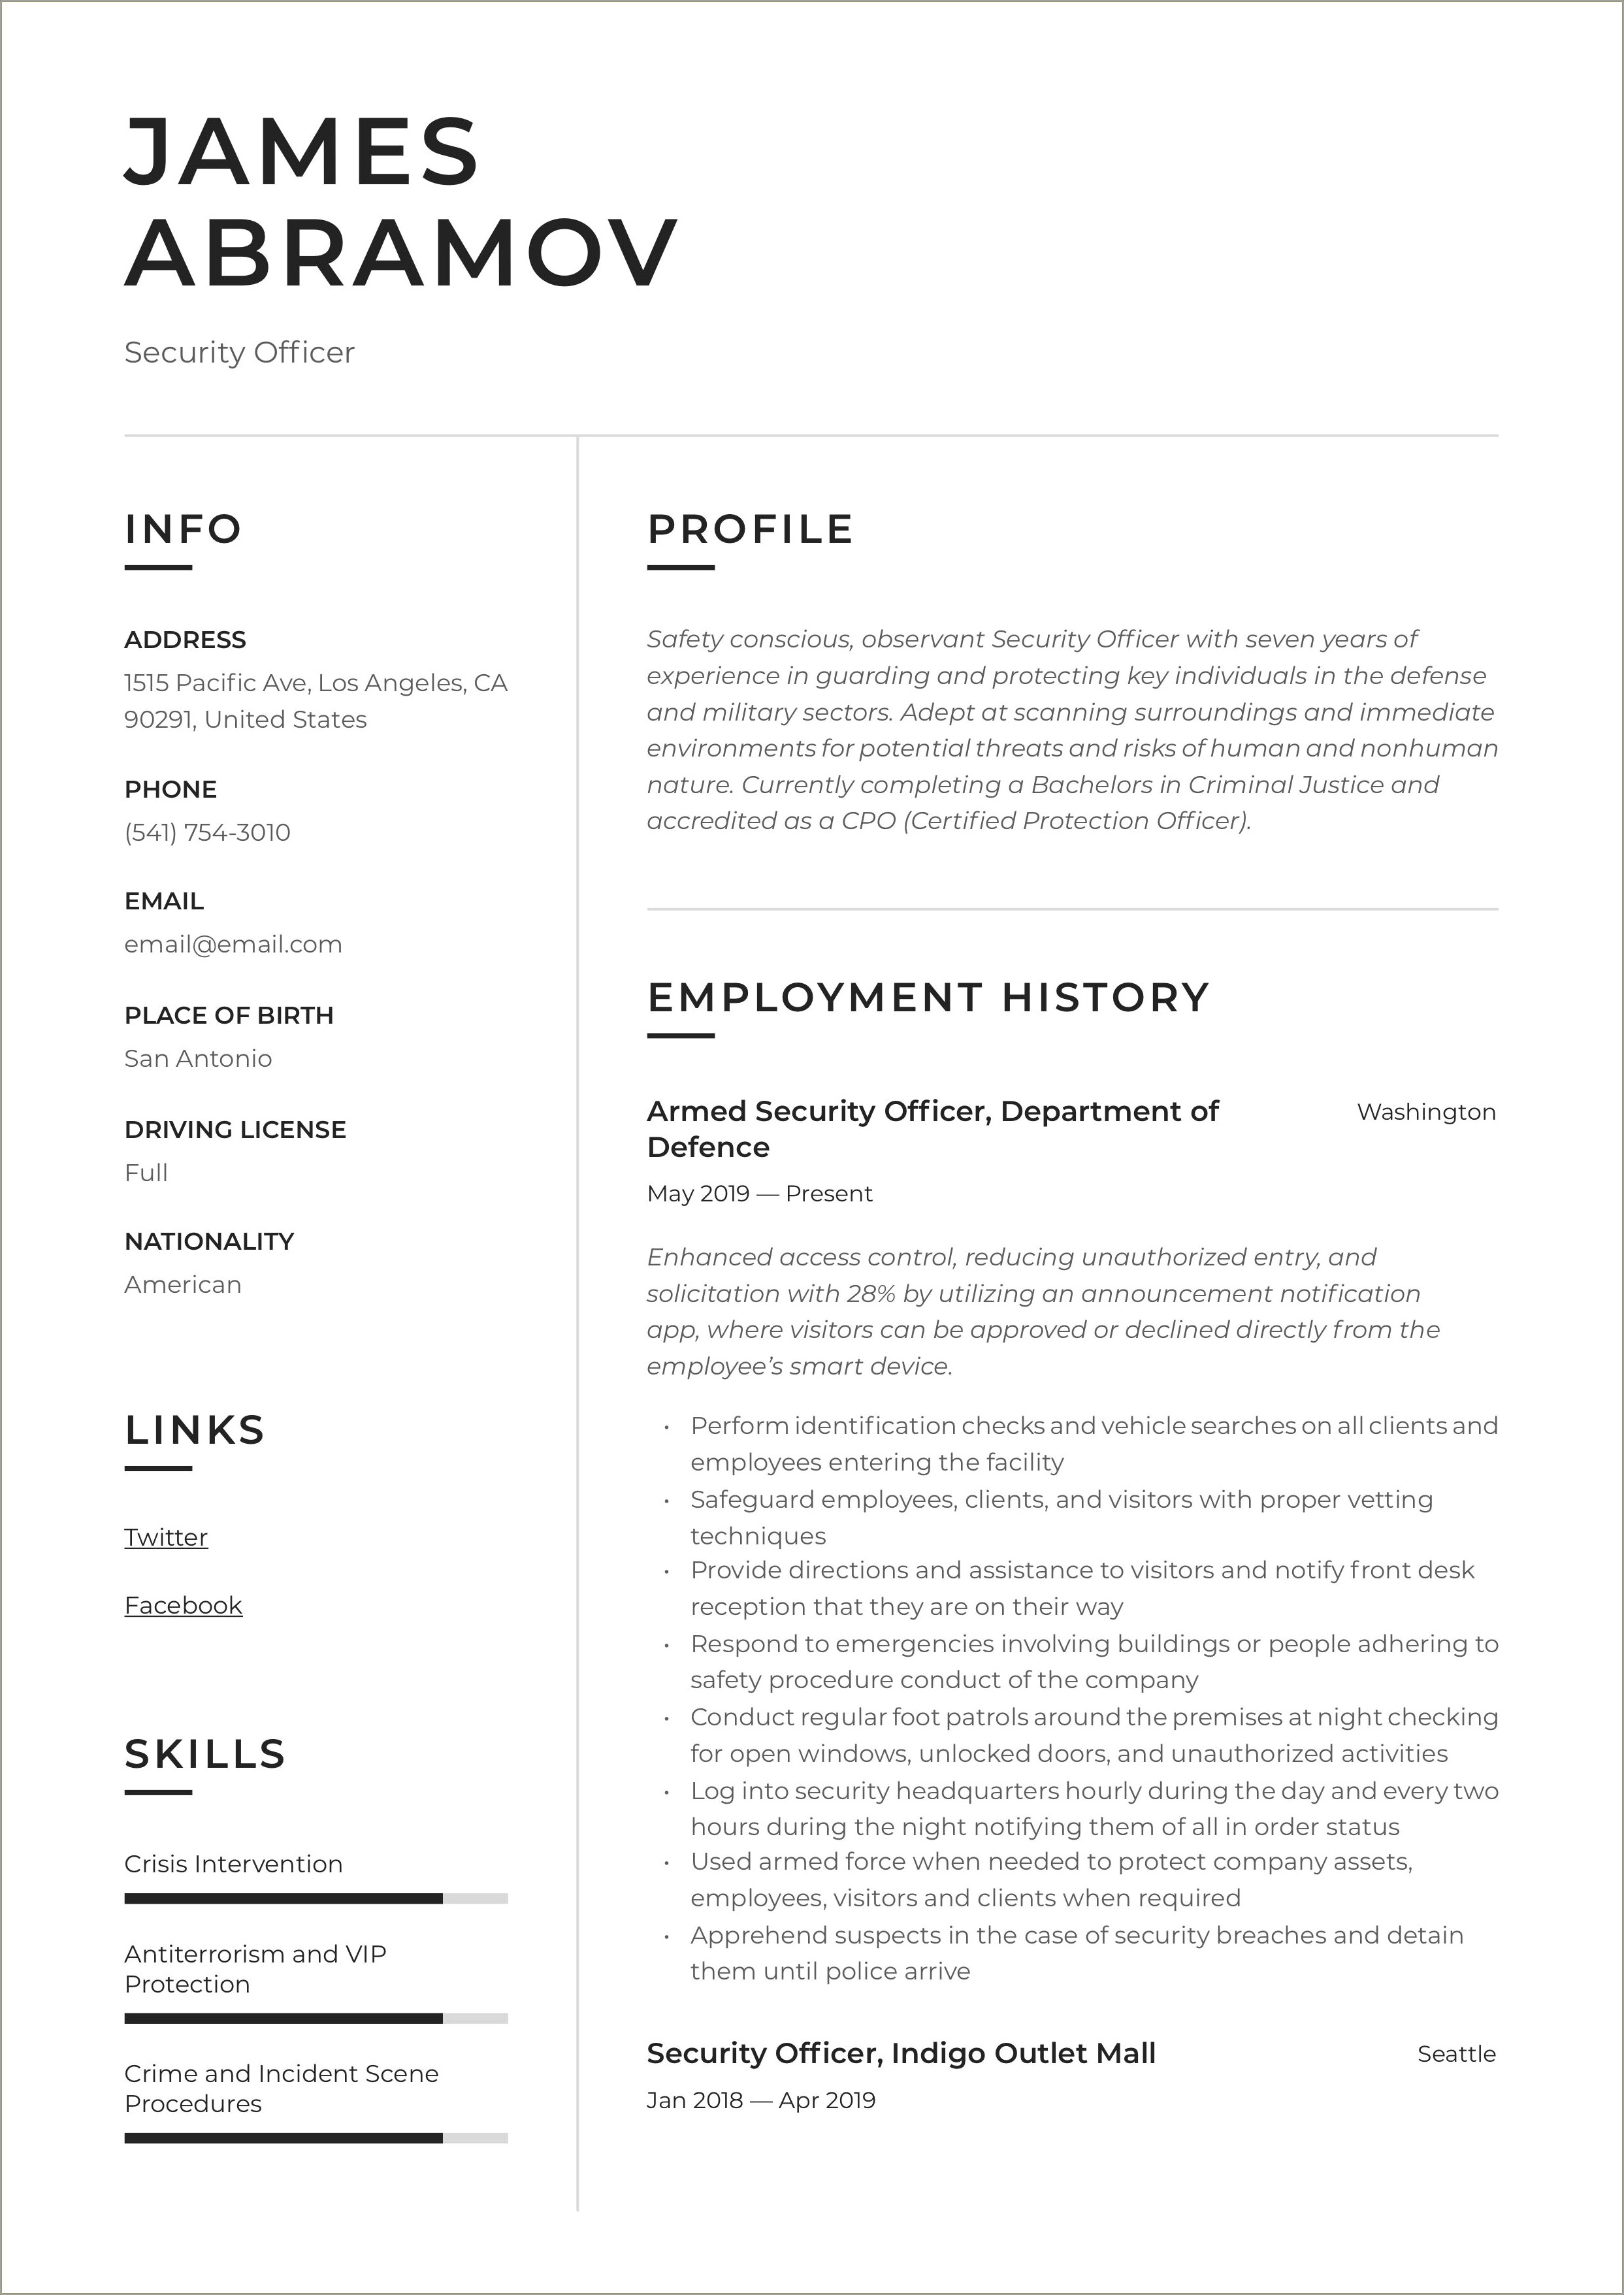 Security Officer Skills And Abilities For Resume